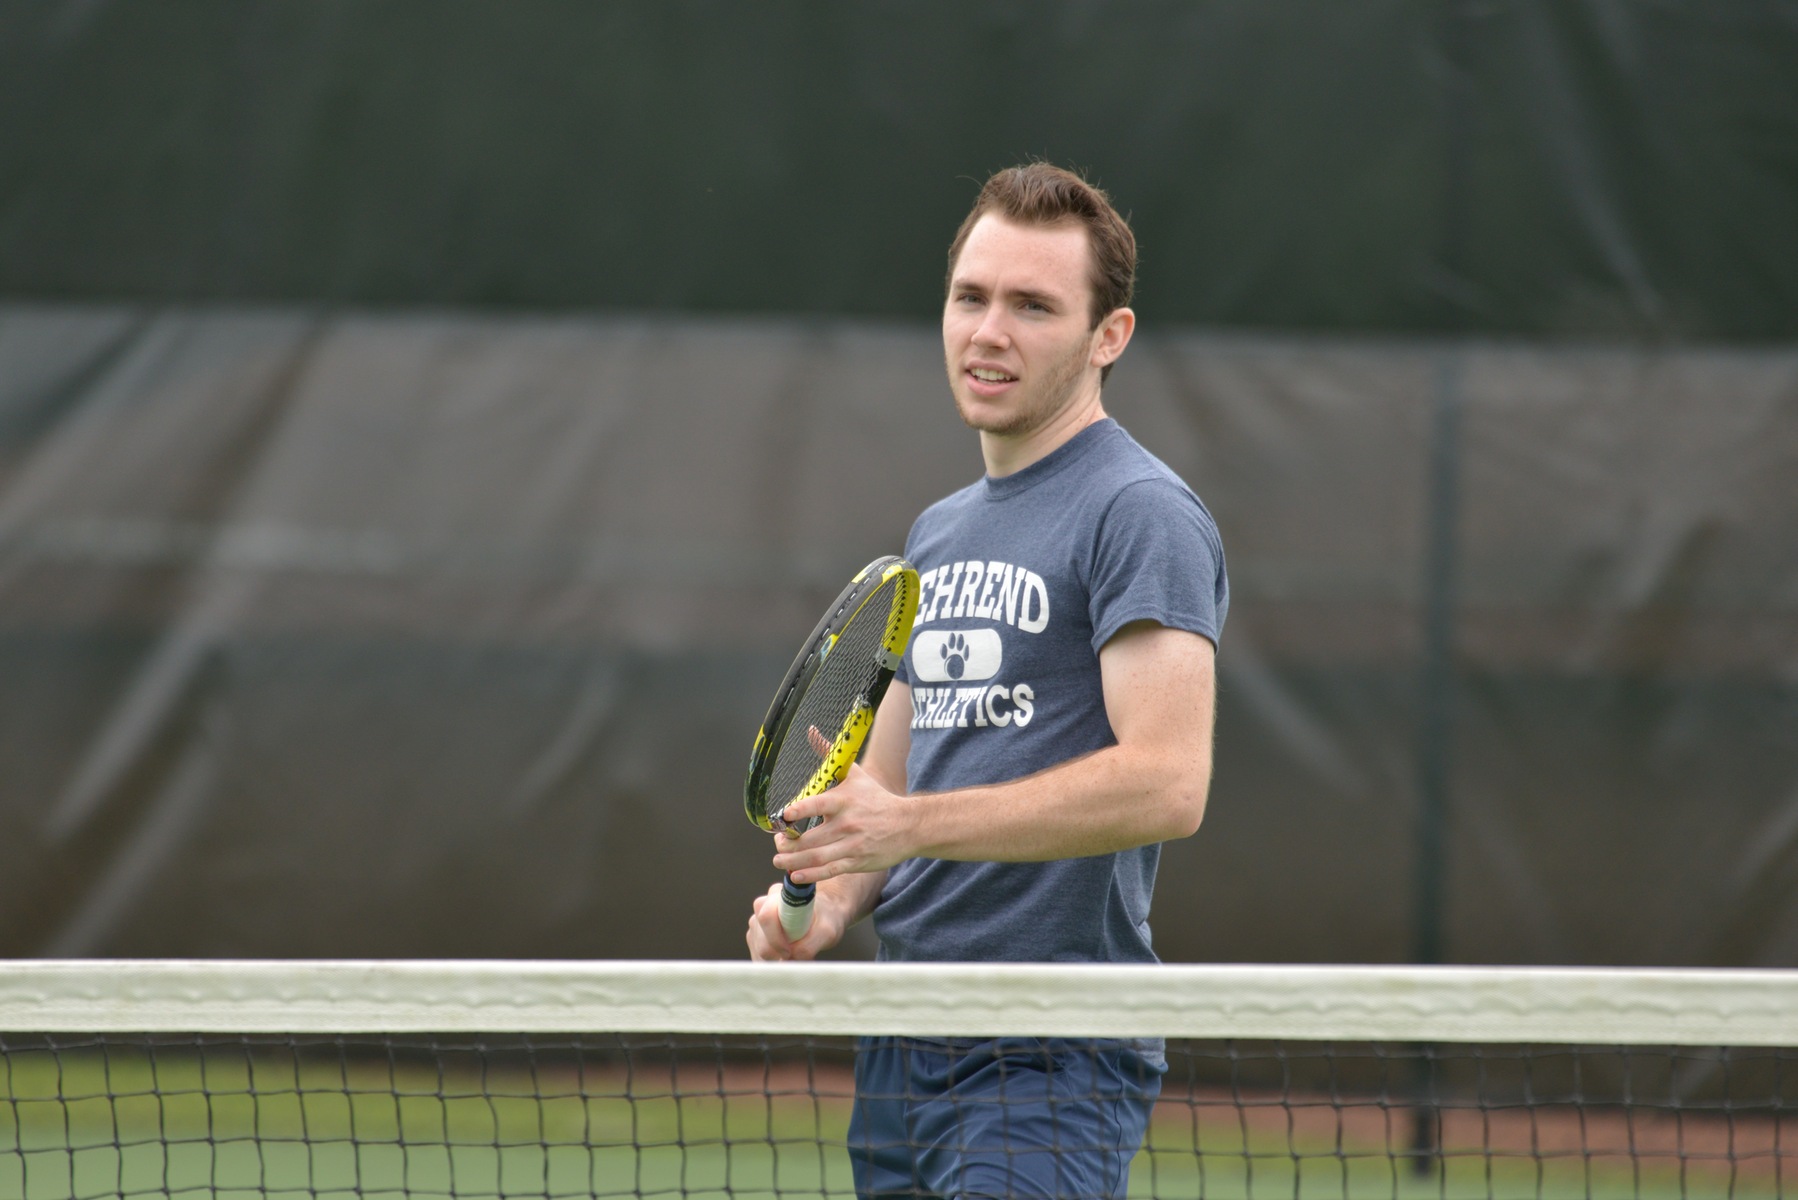 Men's Tennis Competes in Pair of Matches This Weekend